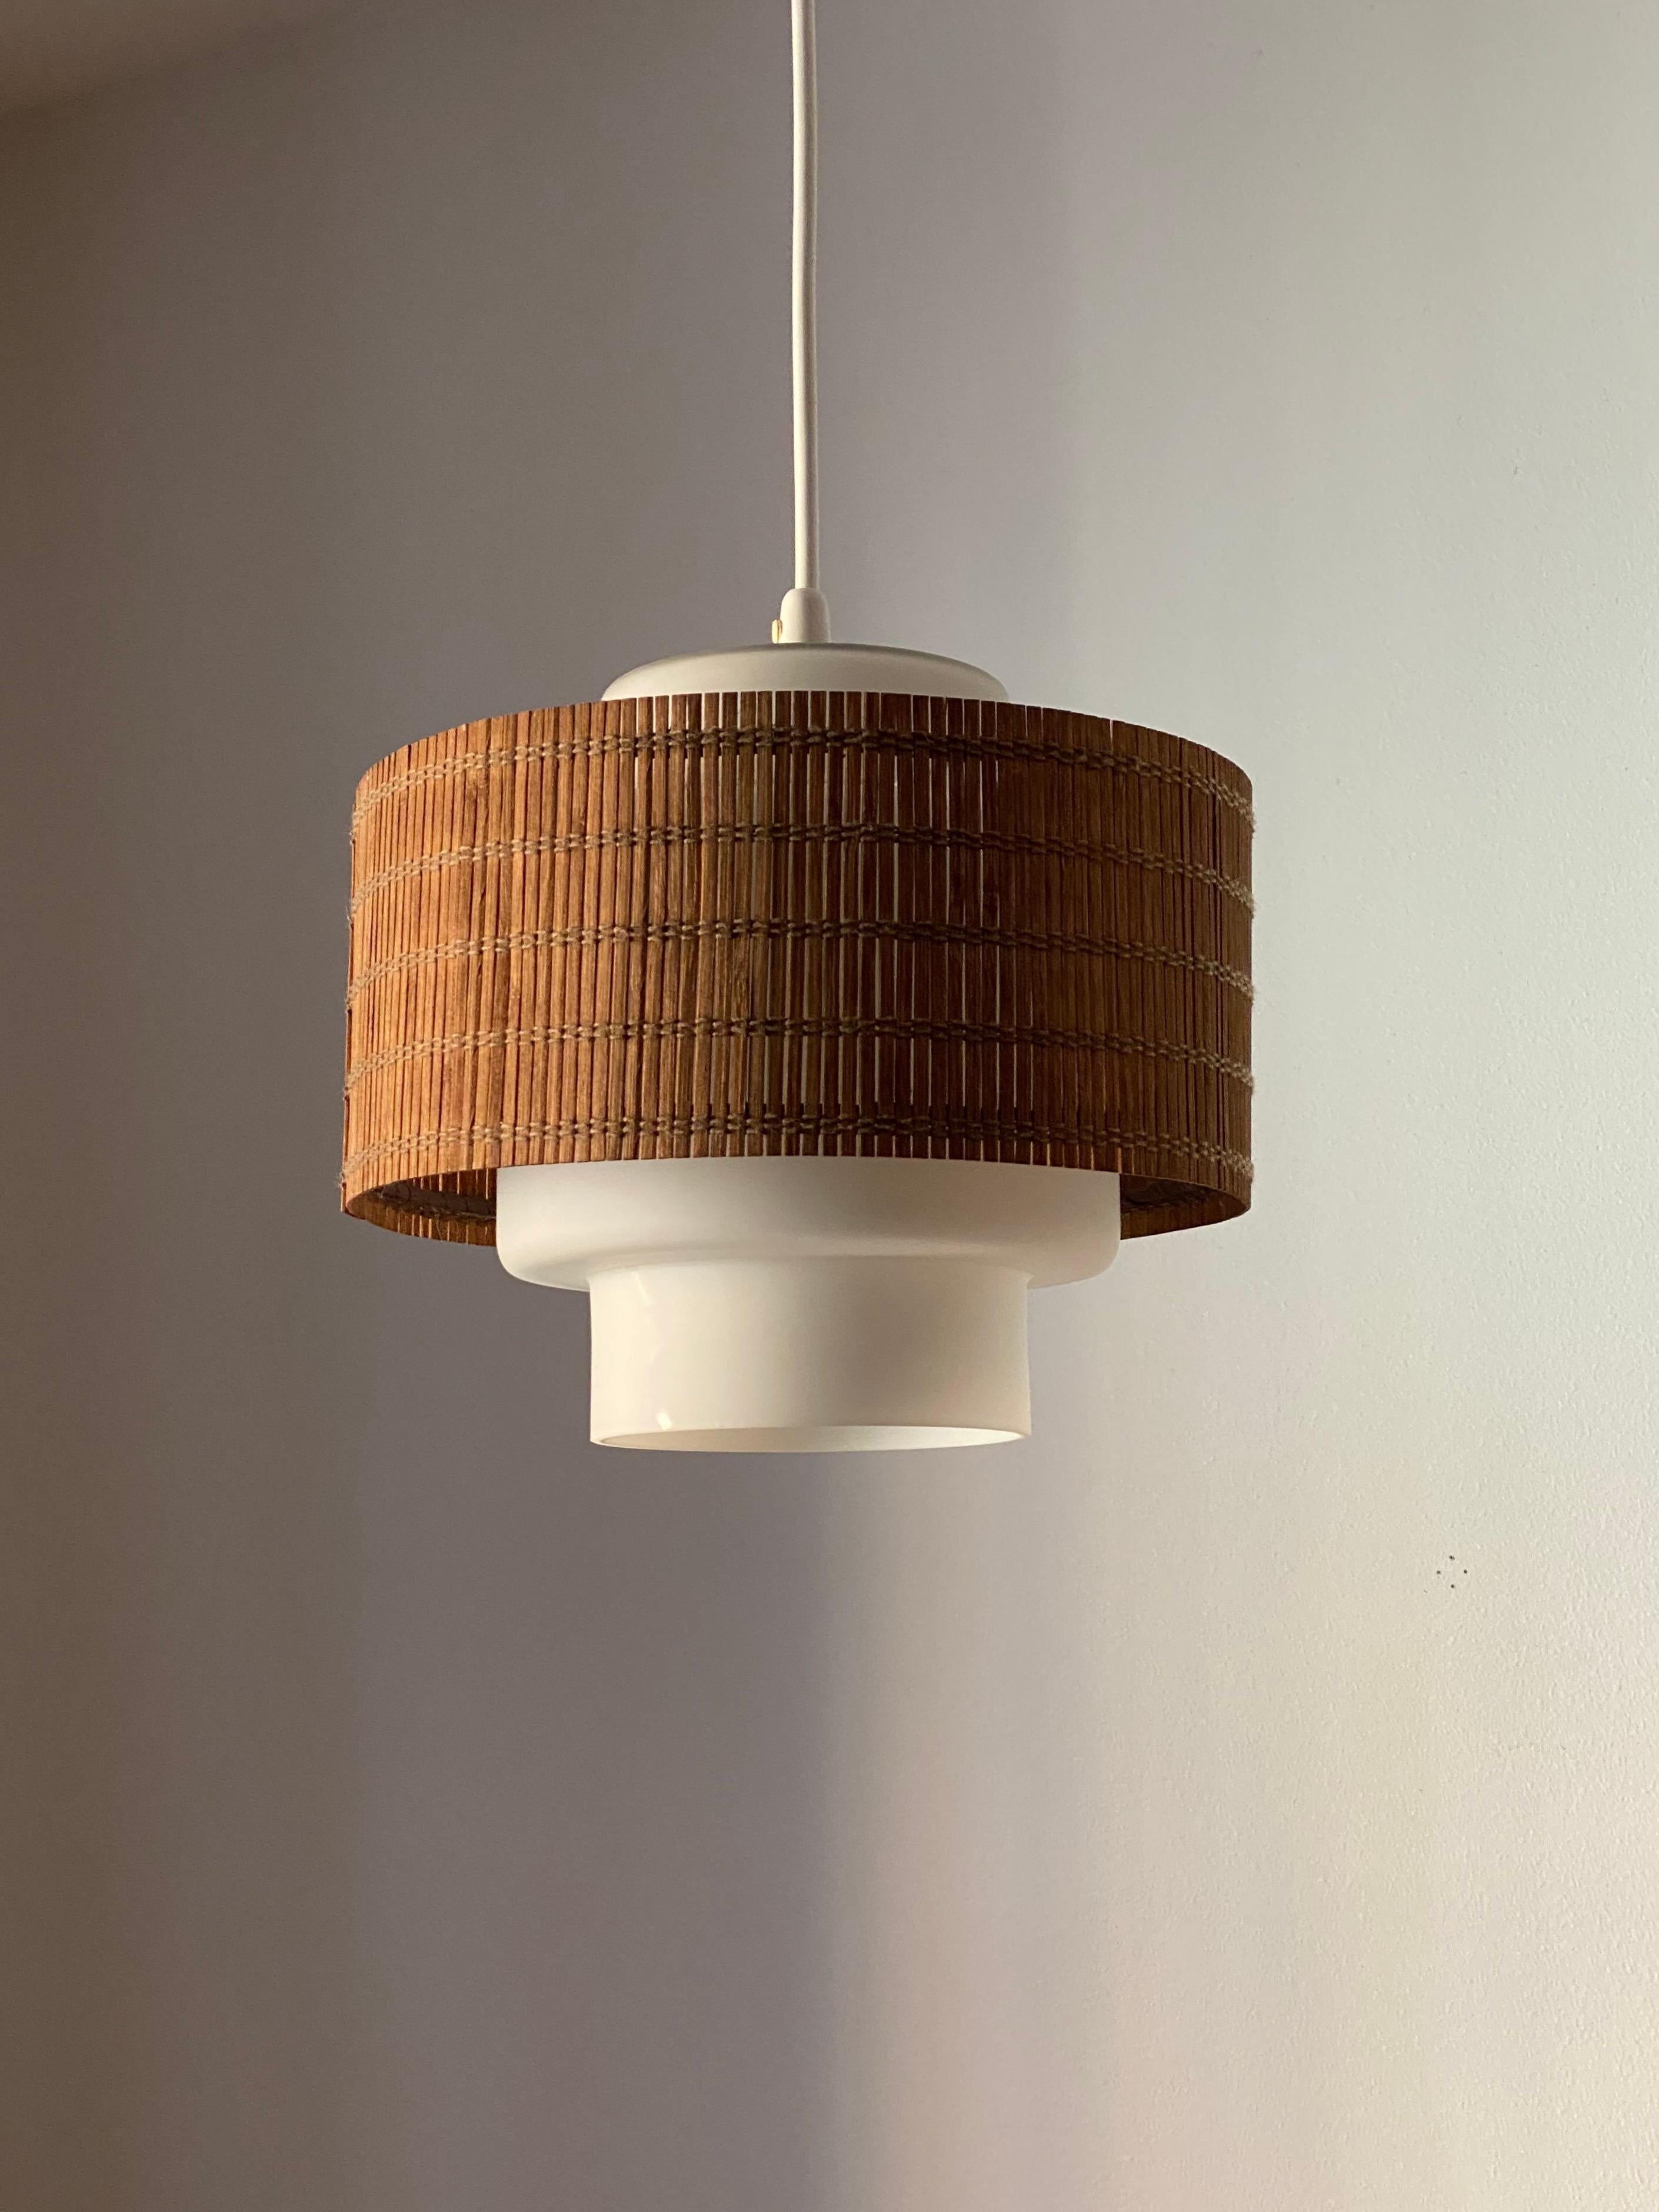 A ceiling light / pendant light. Designed by Maria Lindeman, produced by Idman, Finland, 1950s.

Stated dimensions excluding ceiling cup and cord.

Other designers of the period include Paavo Tynell, Lisa Johansson-Pape, Alvar Aalto, Ilmari